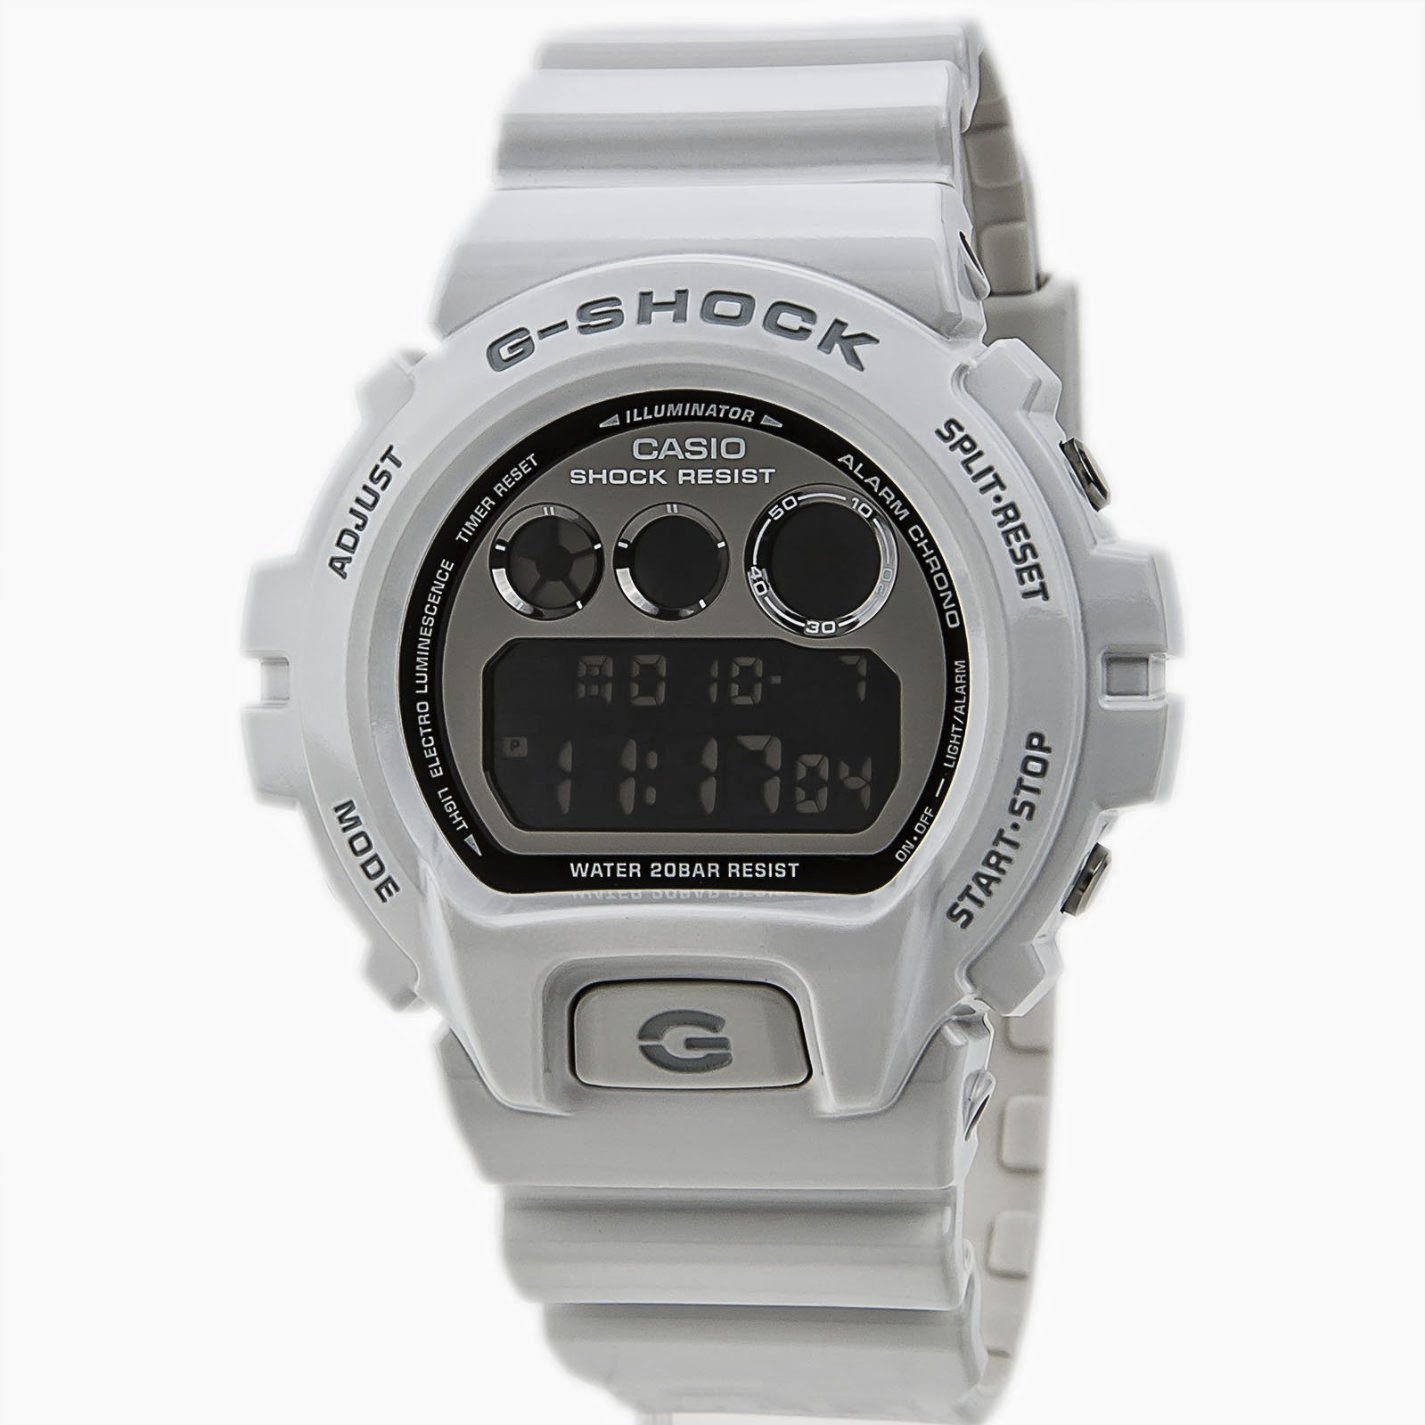 Casual Best Casio Watch Reviews G Shock Top Black Watches for Men ...